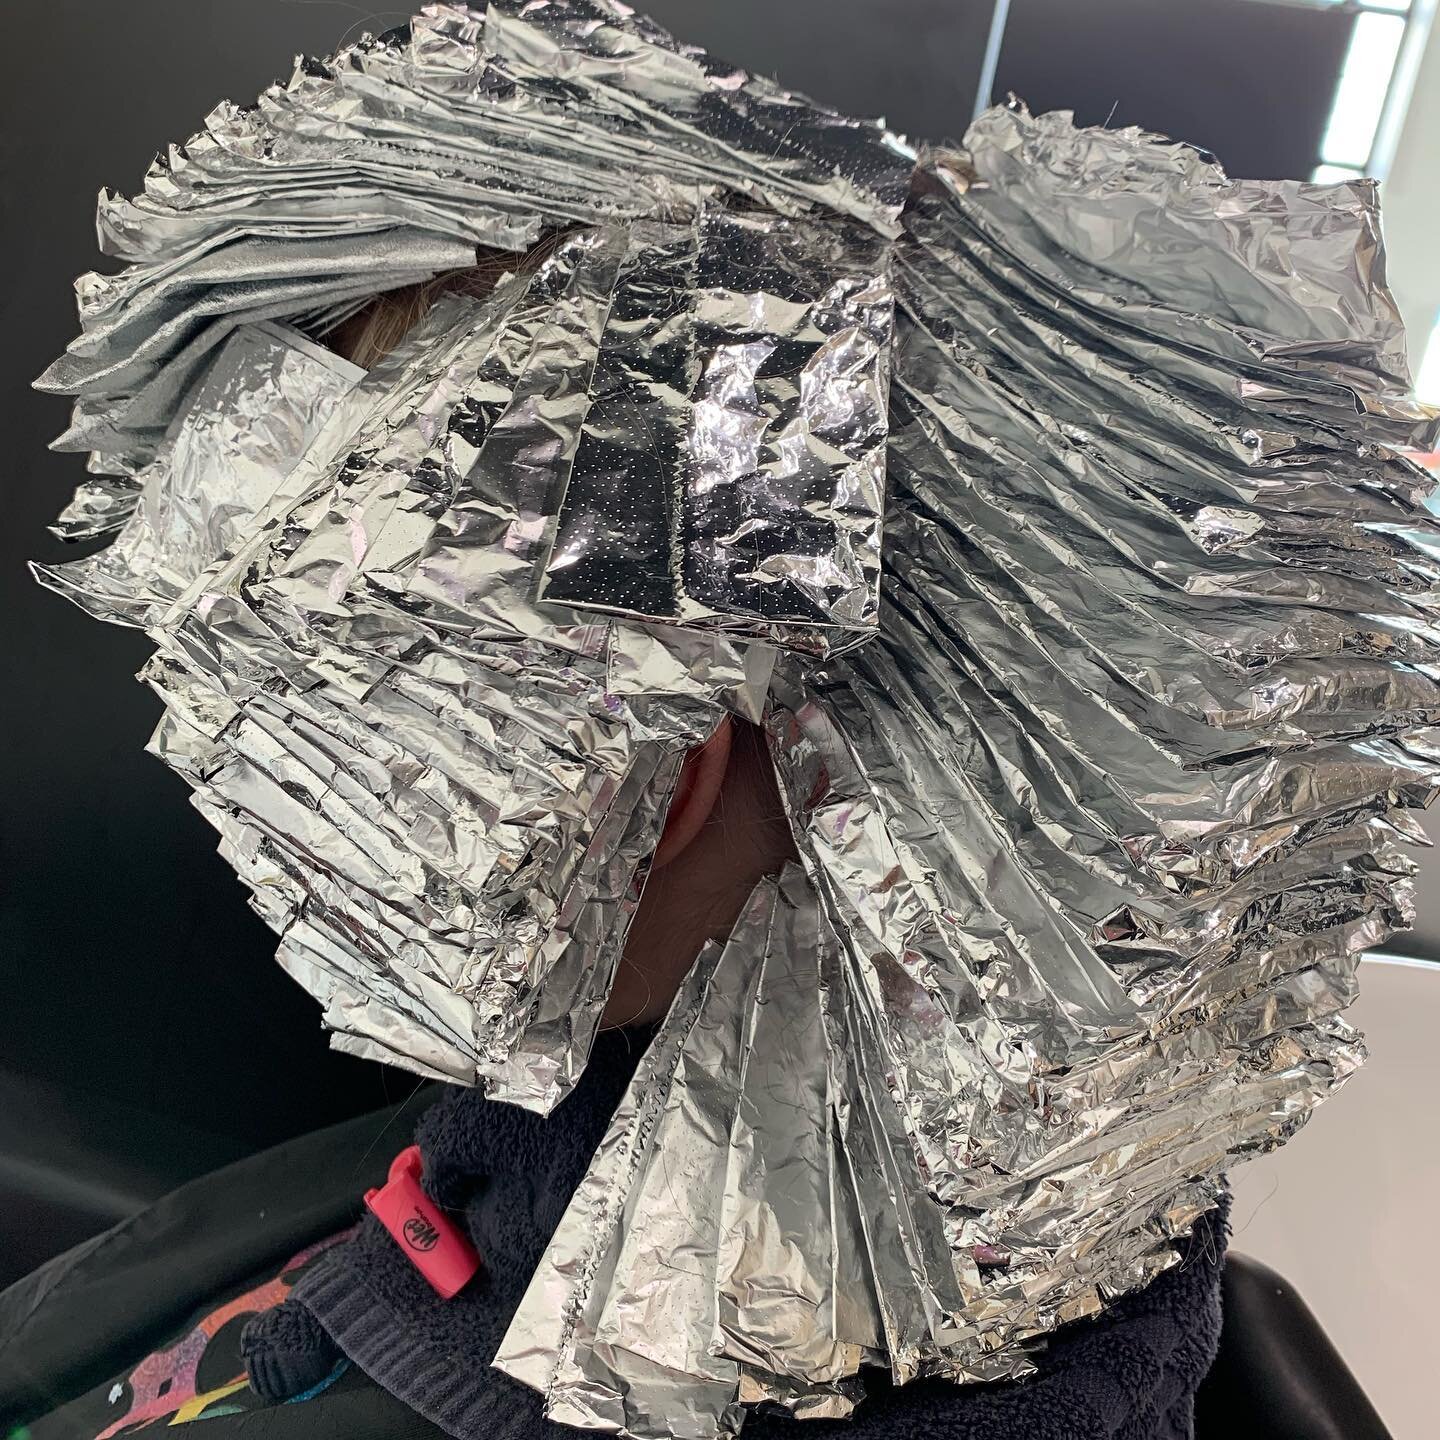 All in a days work&hellip;&hellip; 💪 🤩😮 Who loves looking at a good foil application?! This platinum card took about 2 hours of foiling!